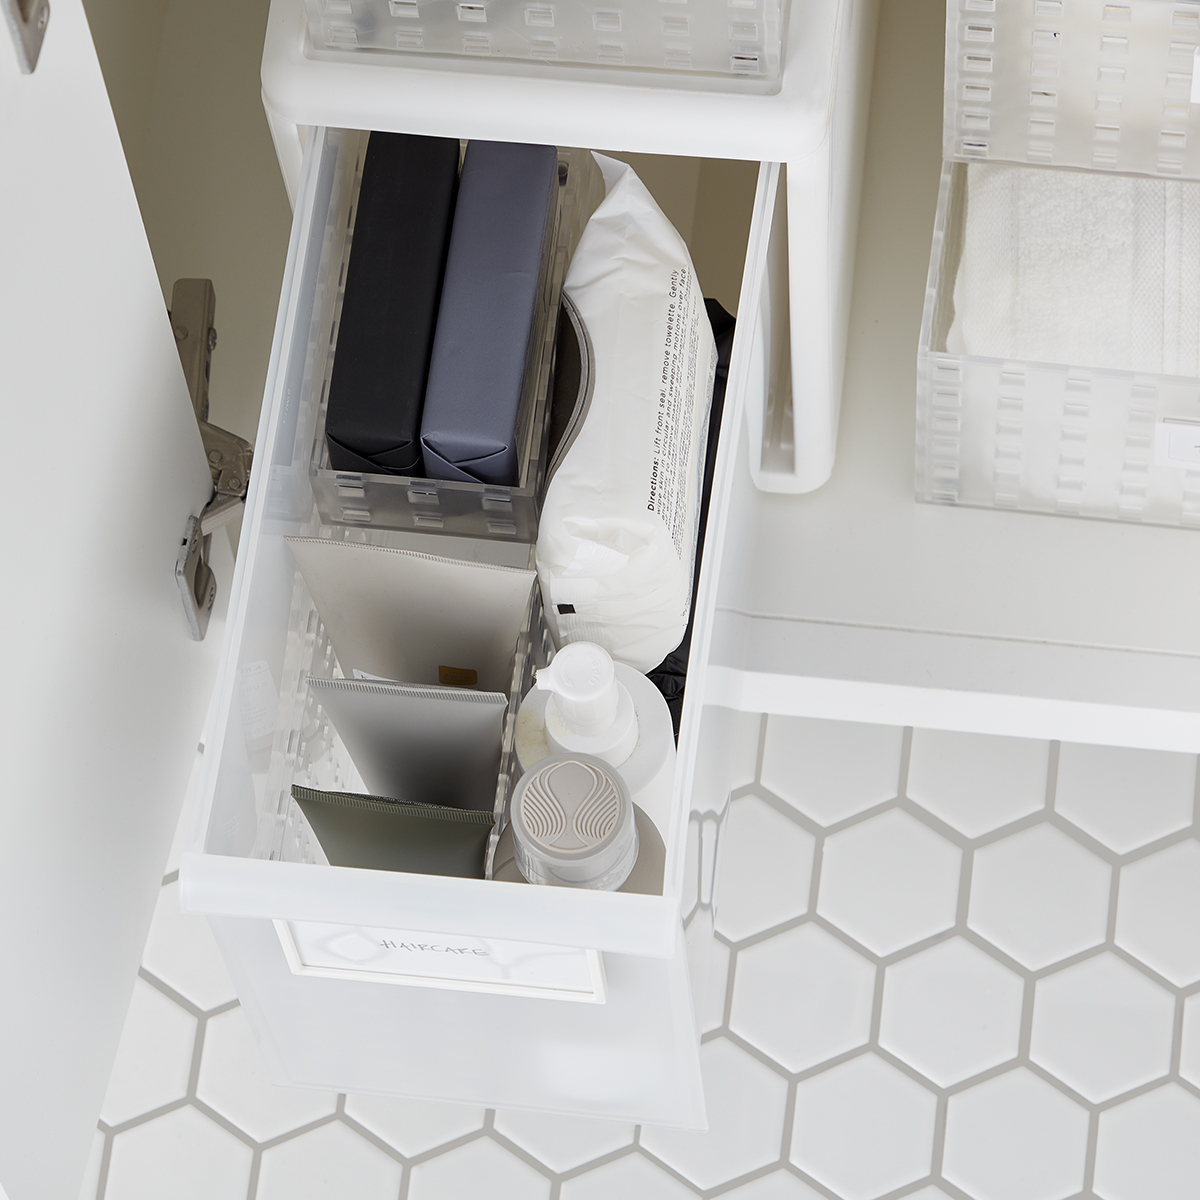 Under the sink storage never looked so good 😍, The Container Store